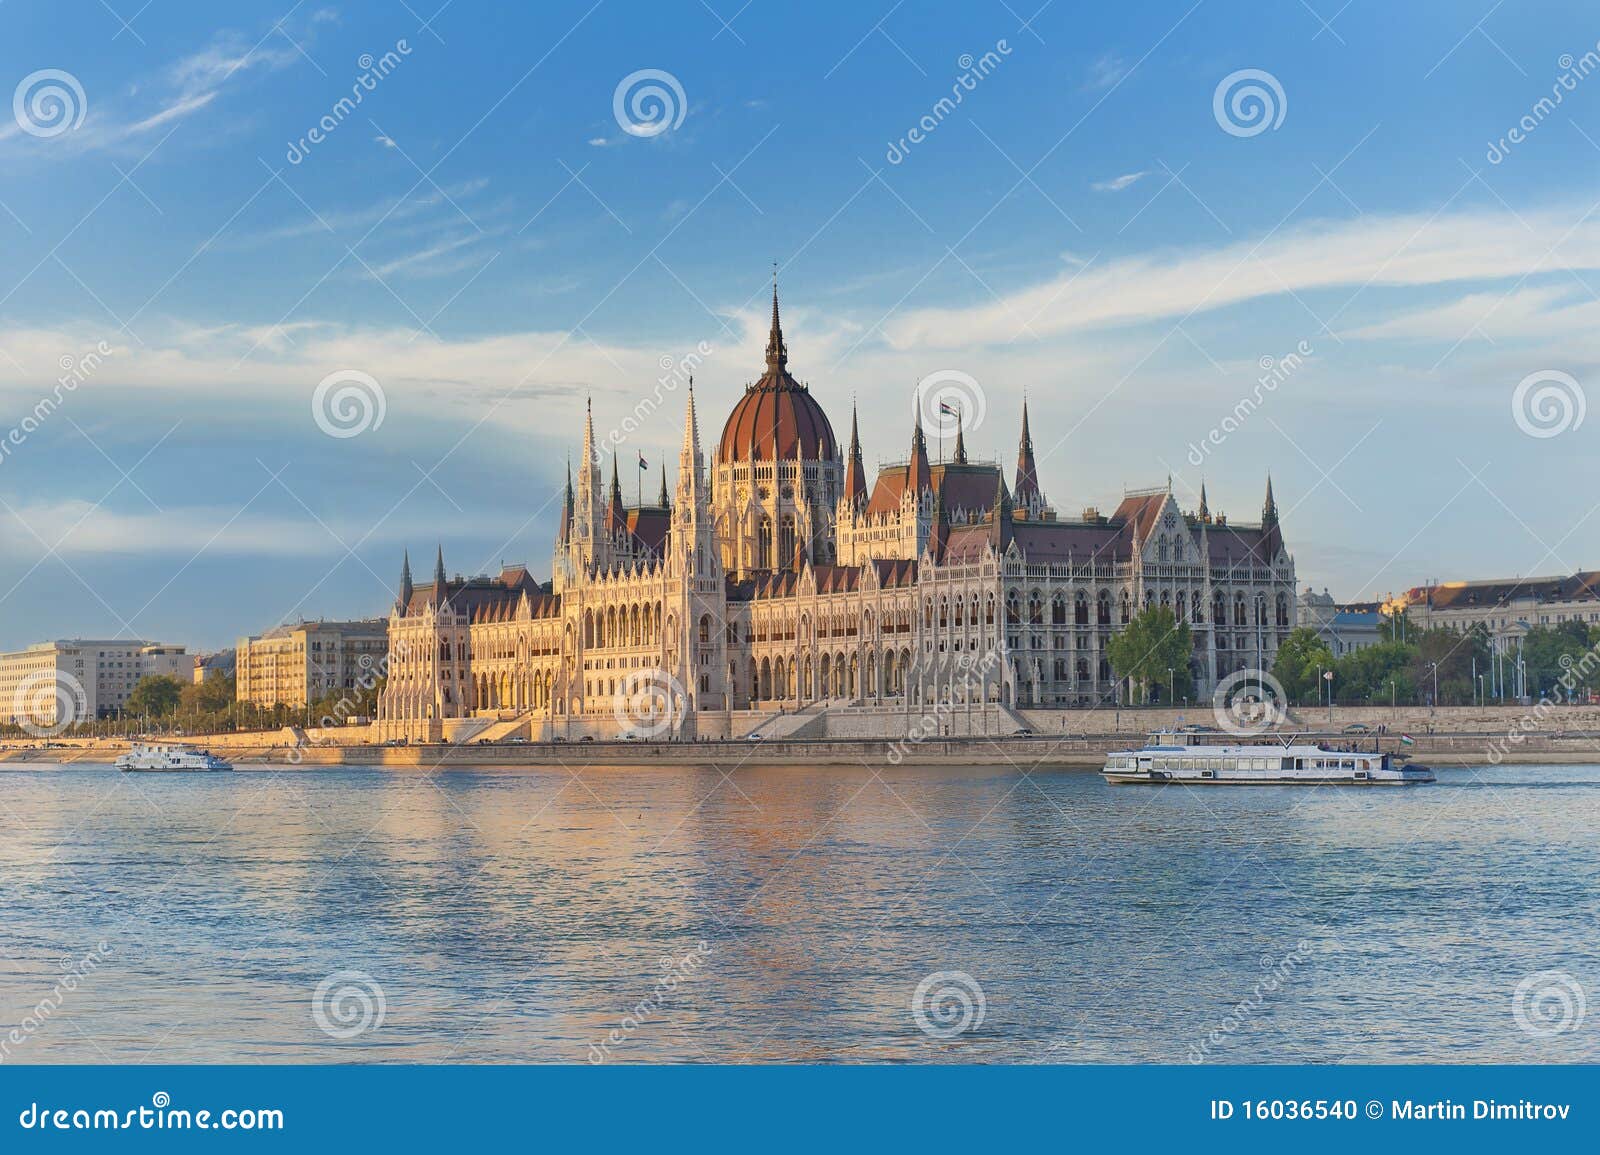 the parliament in budapest